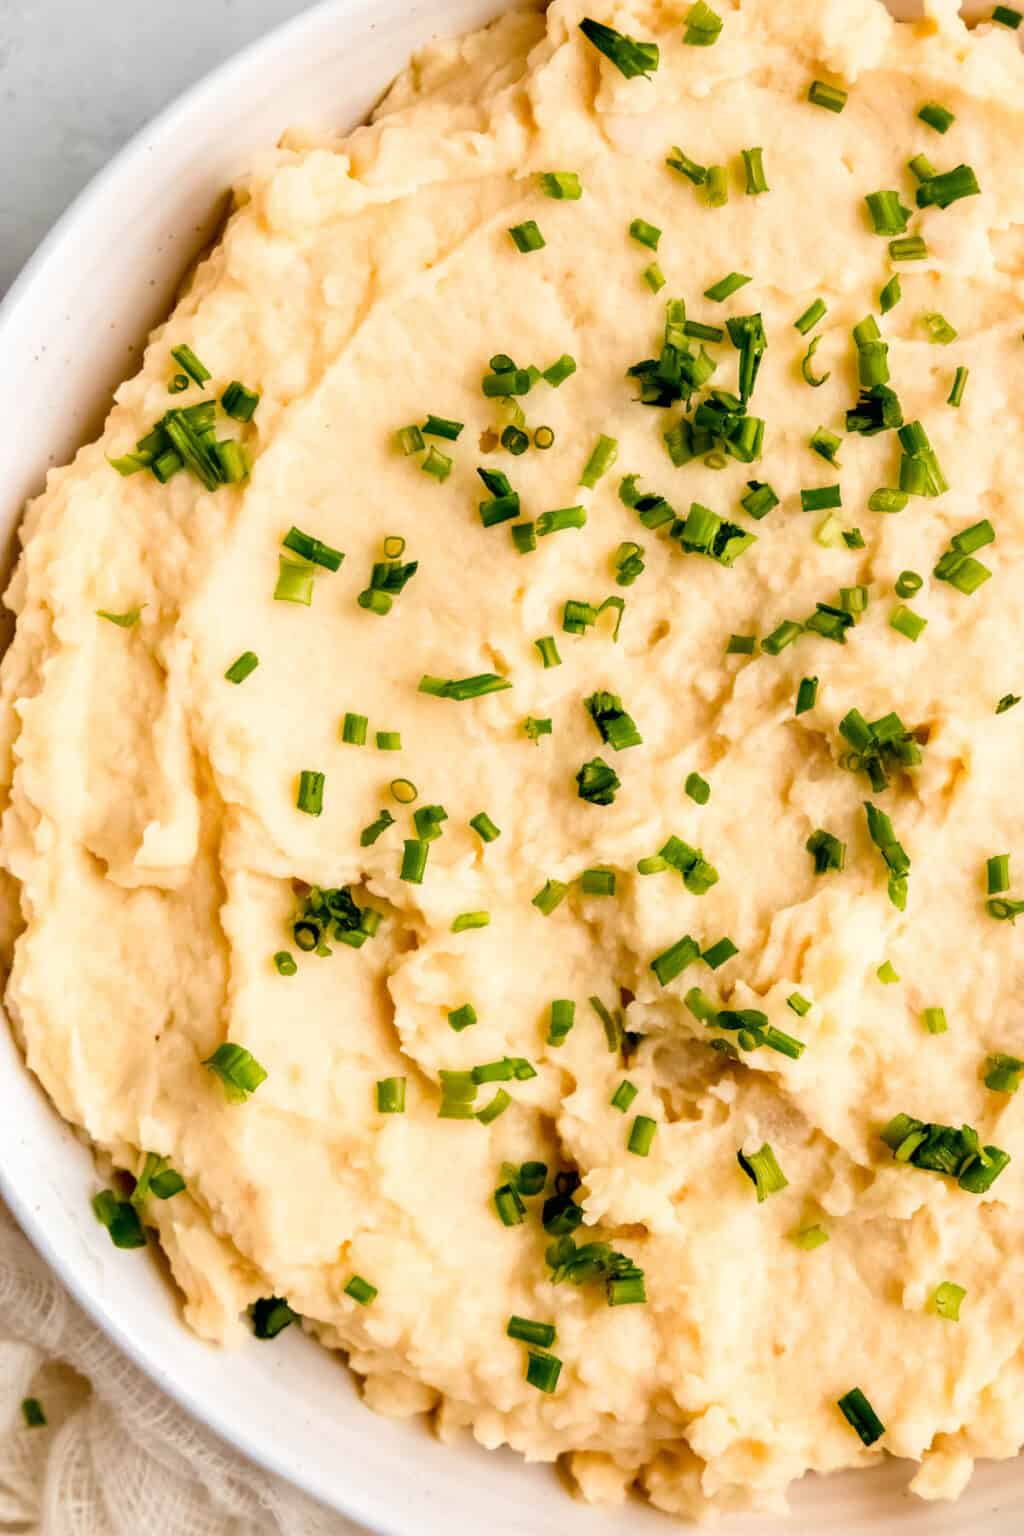 Healthy Mashed Potatoes With Greek Yogurt | Confessions of a Grocery Addict